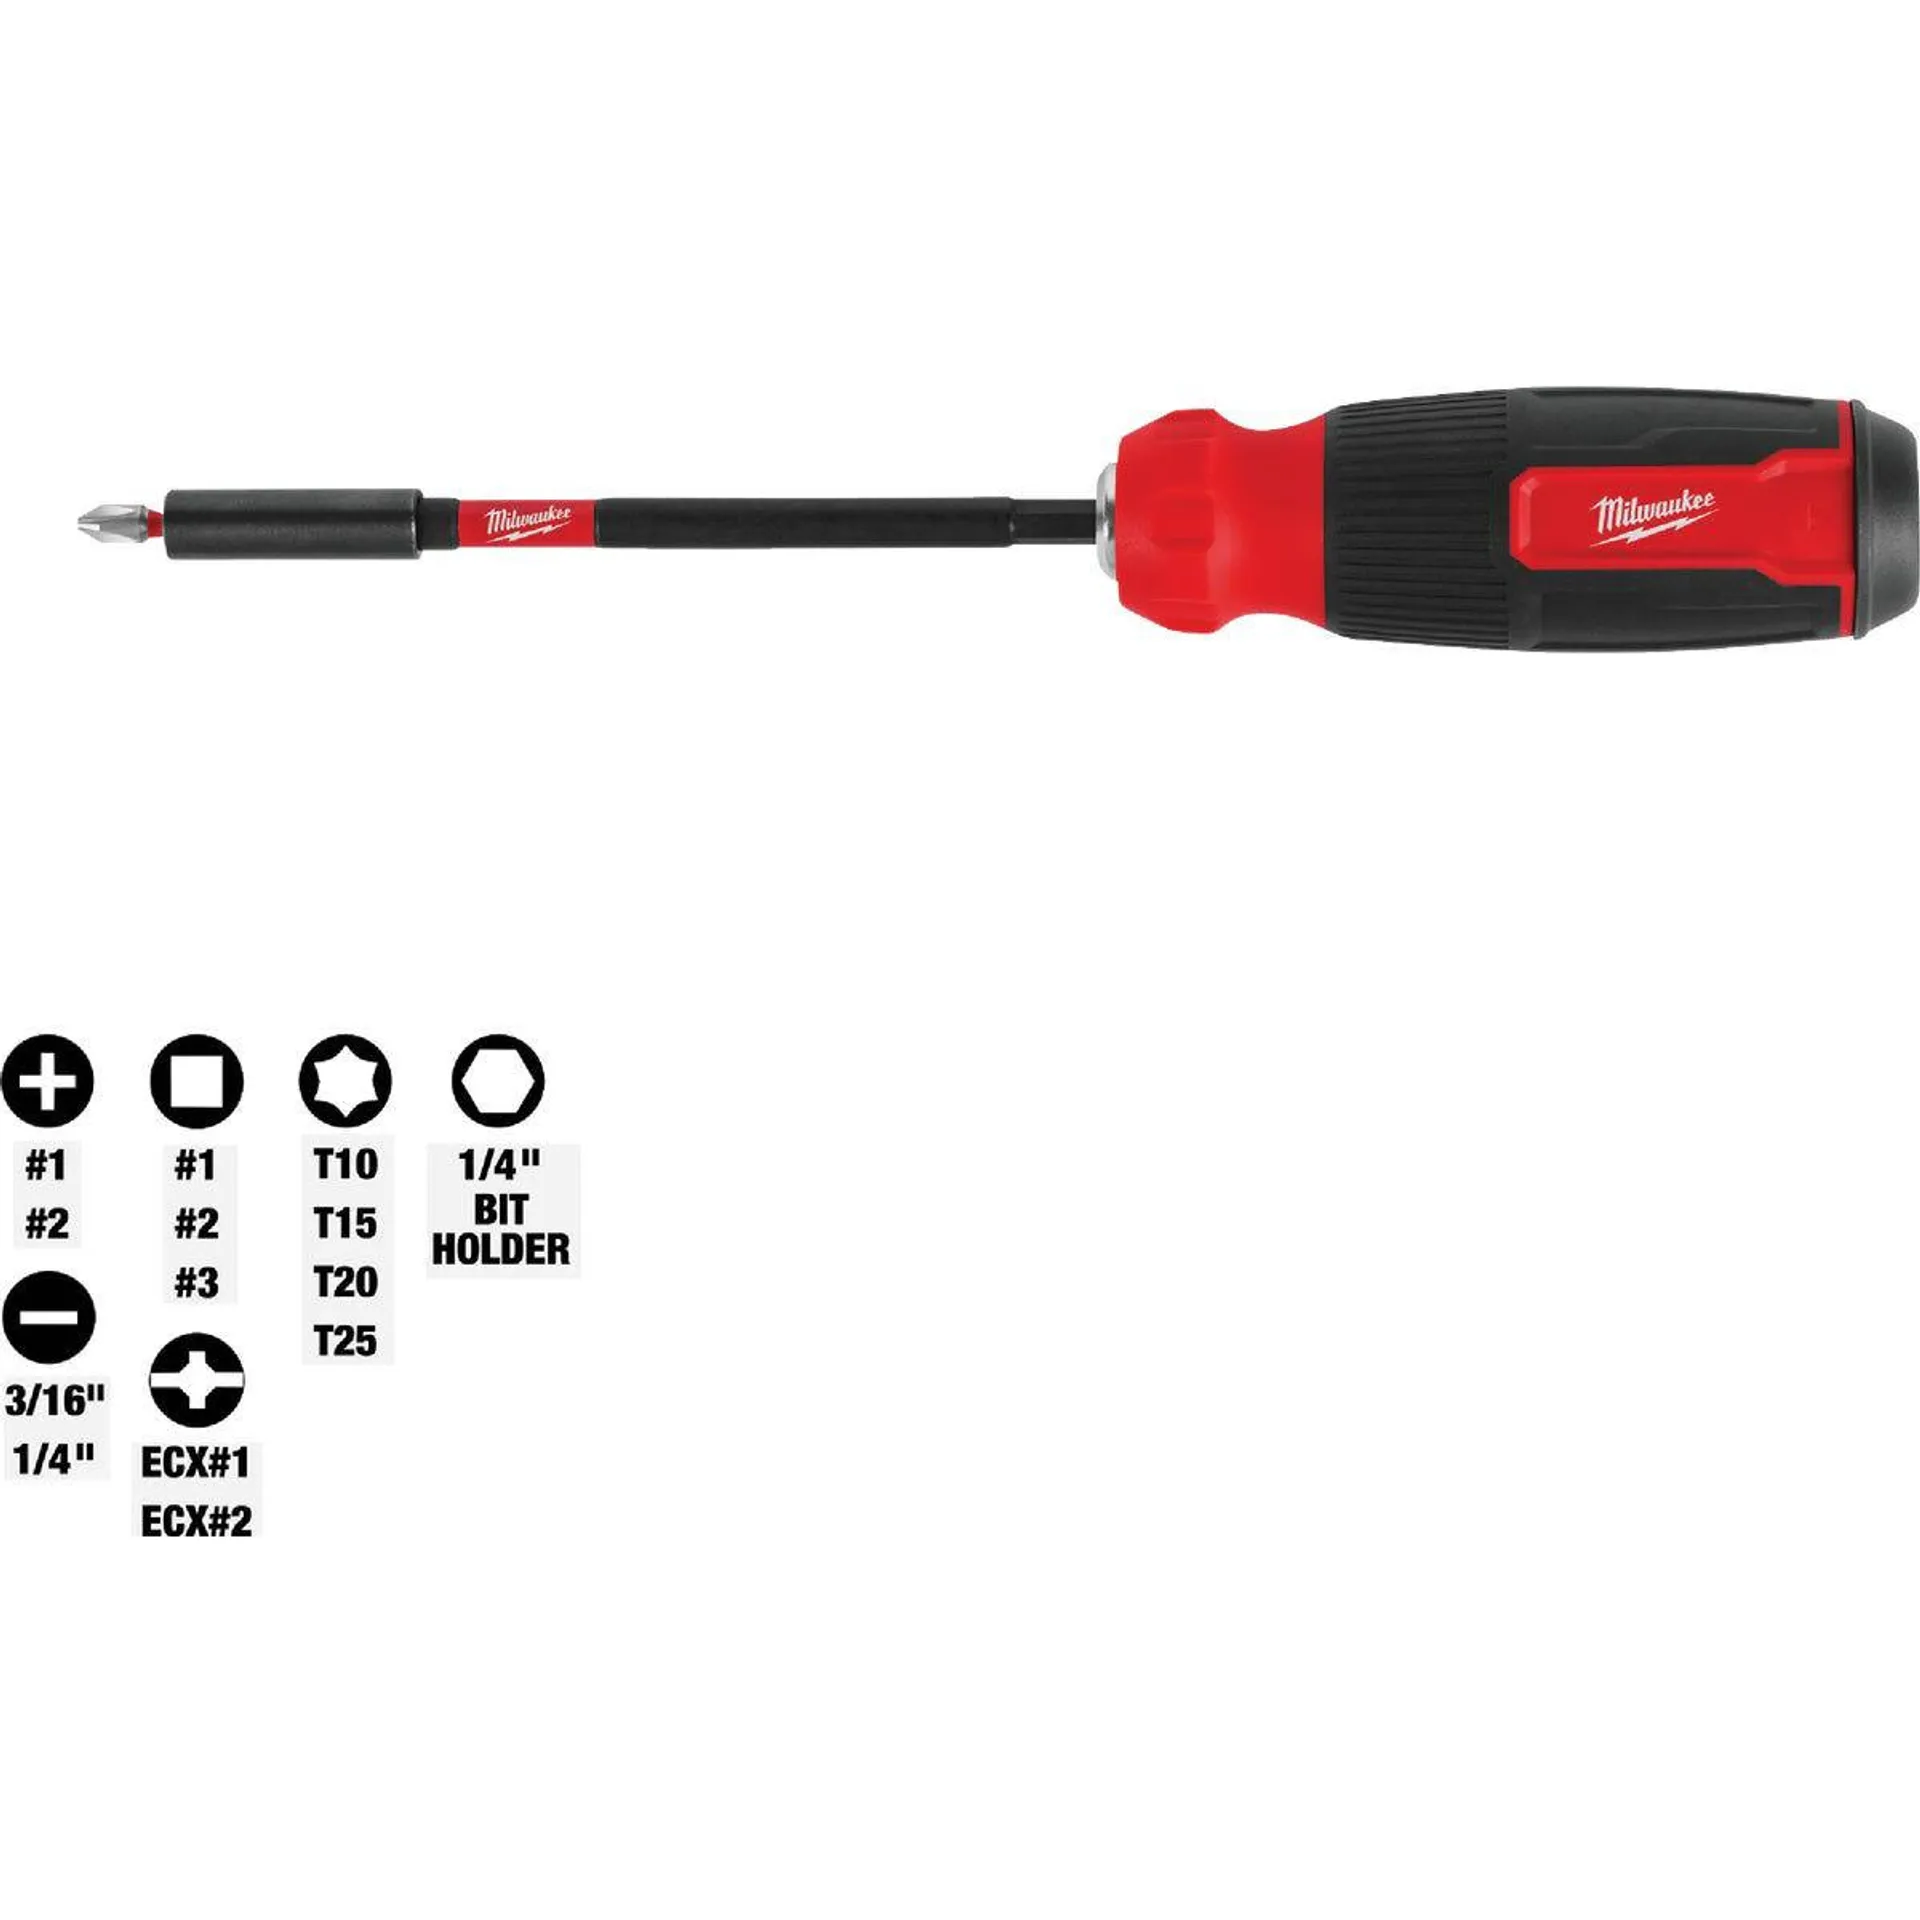 Milwaukee 14-In-1 Multi-Bit Screwdriver with SHOCKWAVE Impact Duty Bits